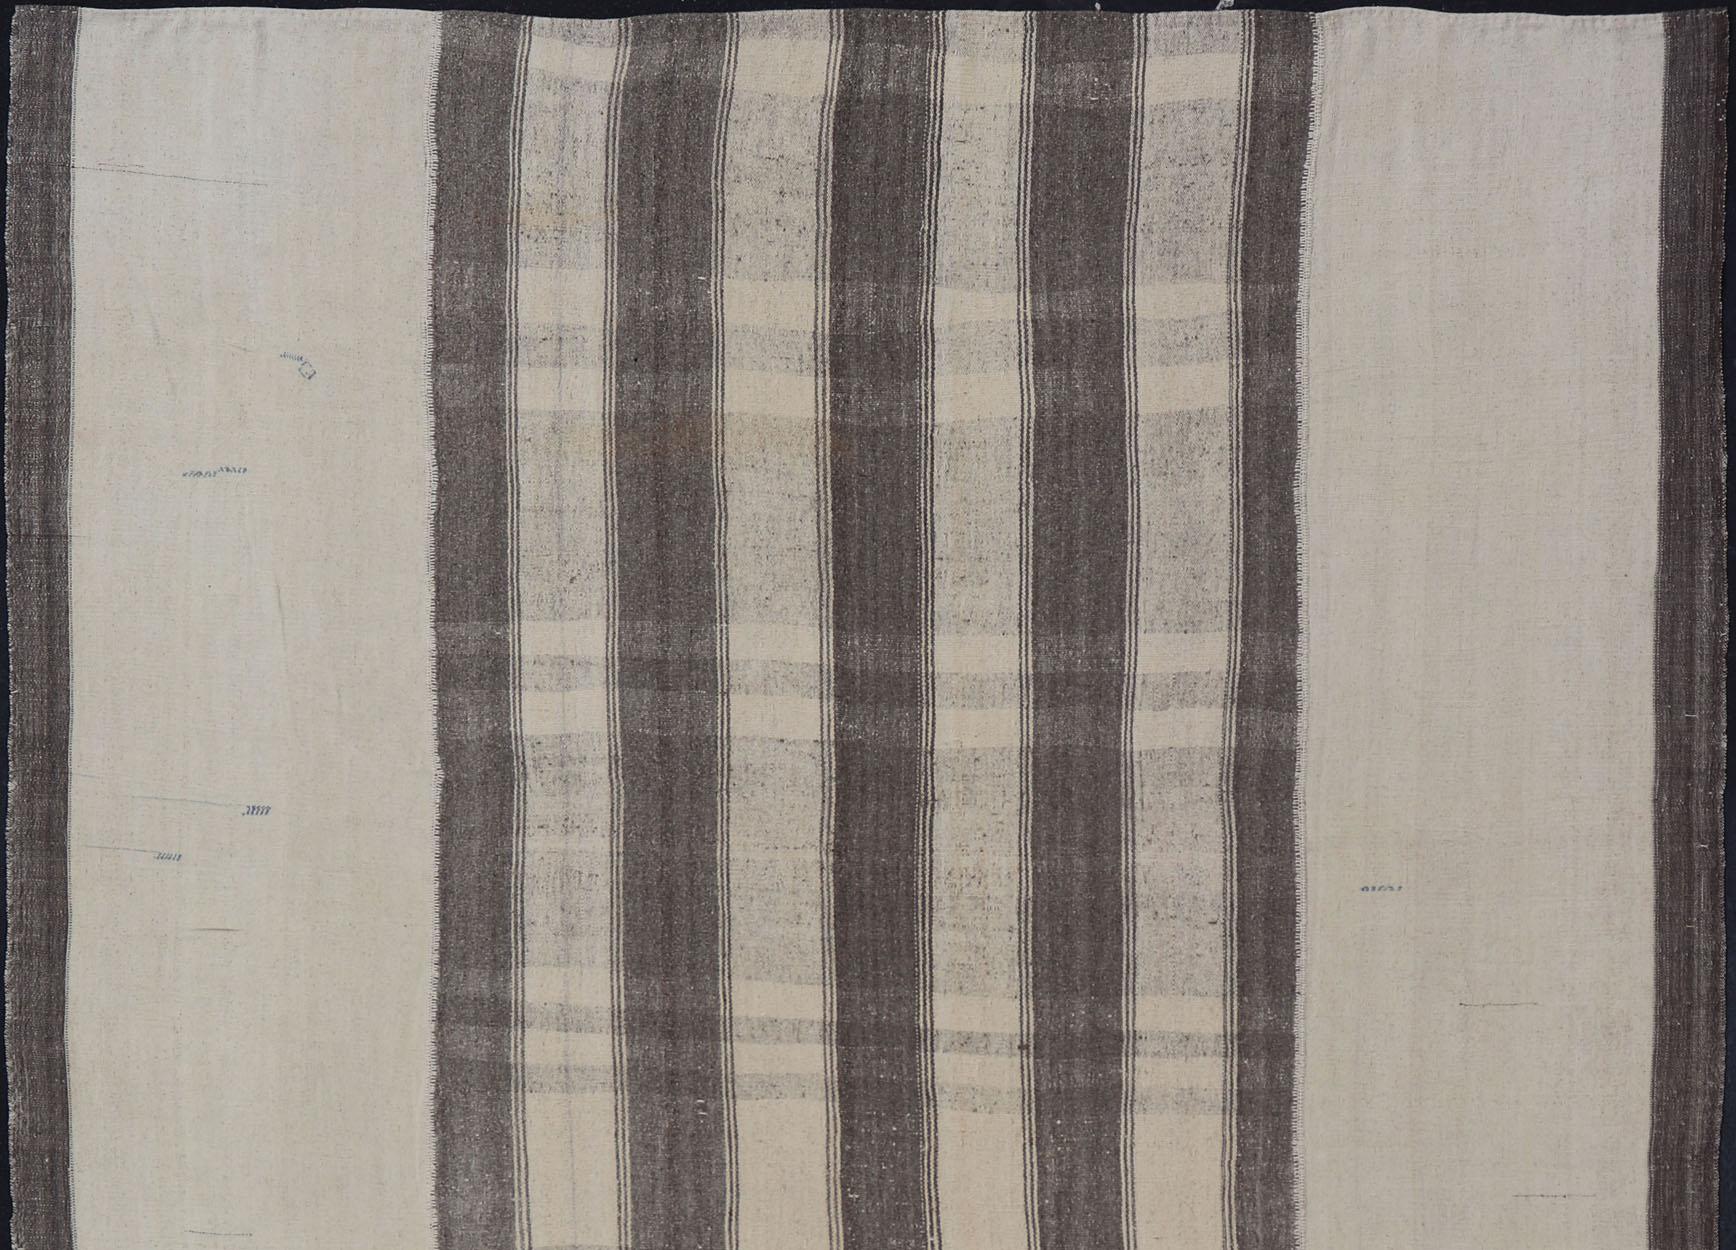 Flat-weave Kilim vintage rug from Turkey with stripes in grey, white, taupe, and cream. Keivan Woven Arts / Rug TU-NED-4971, country of origin / type: Turkey / Kilim, circa 1950.


Measures: 11'5 x 15'6.